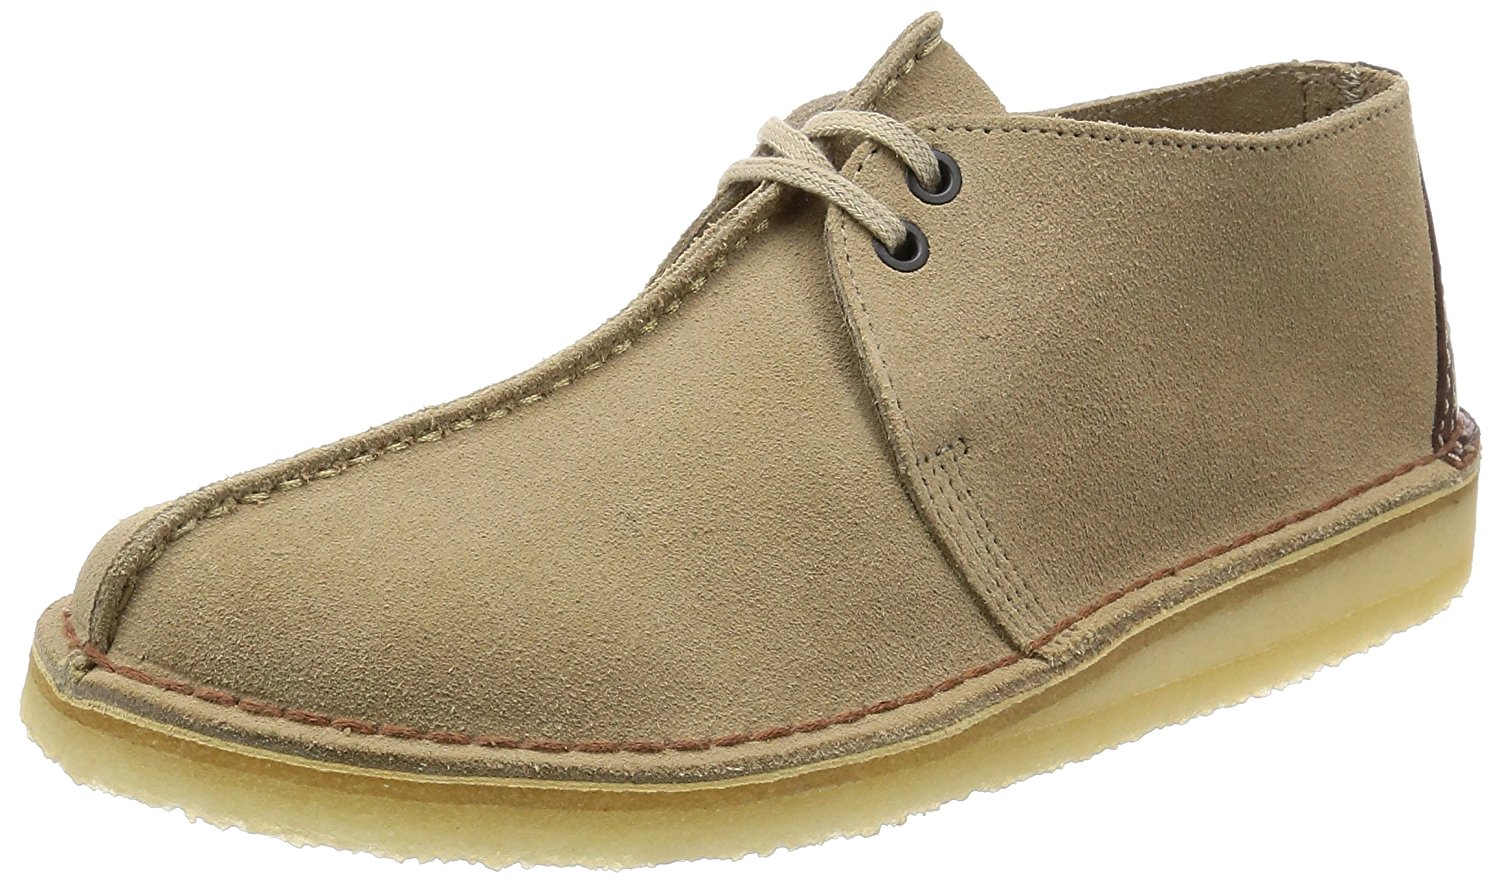 cheapest place to buy clarks shoes